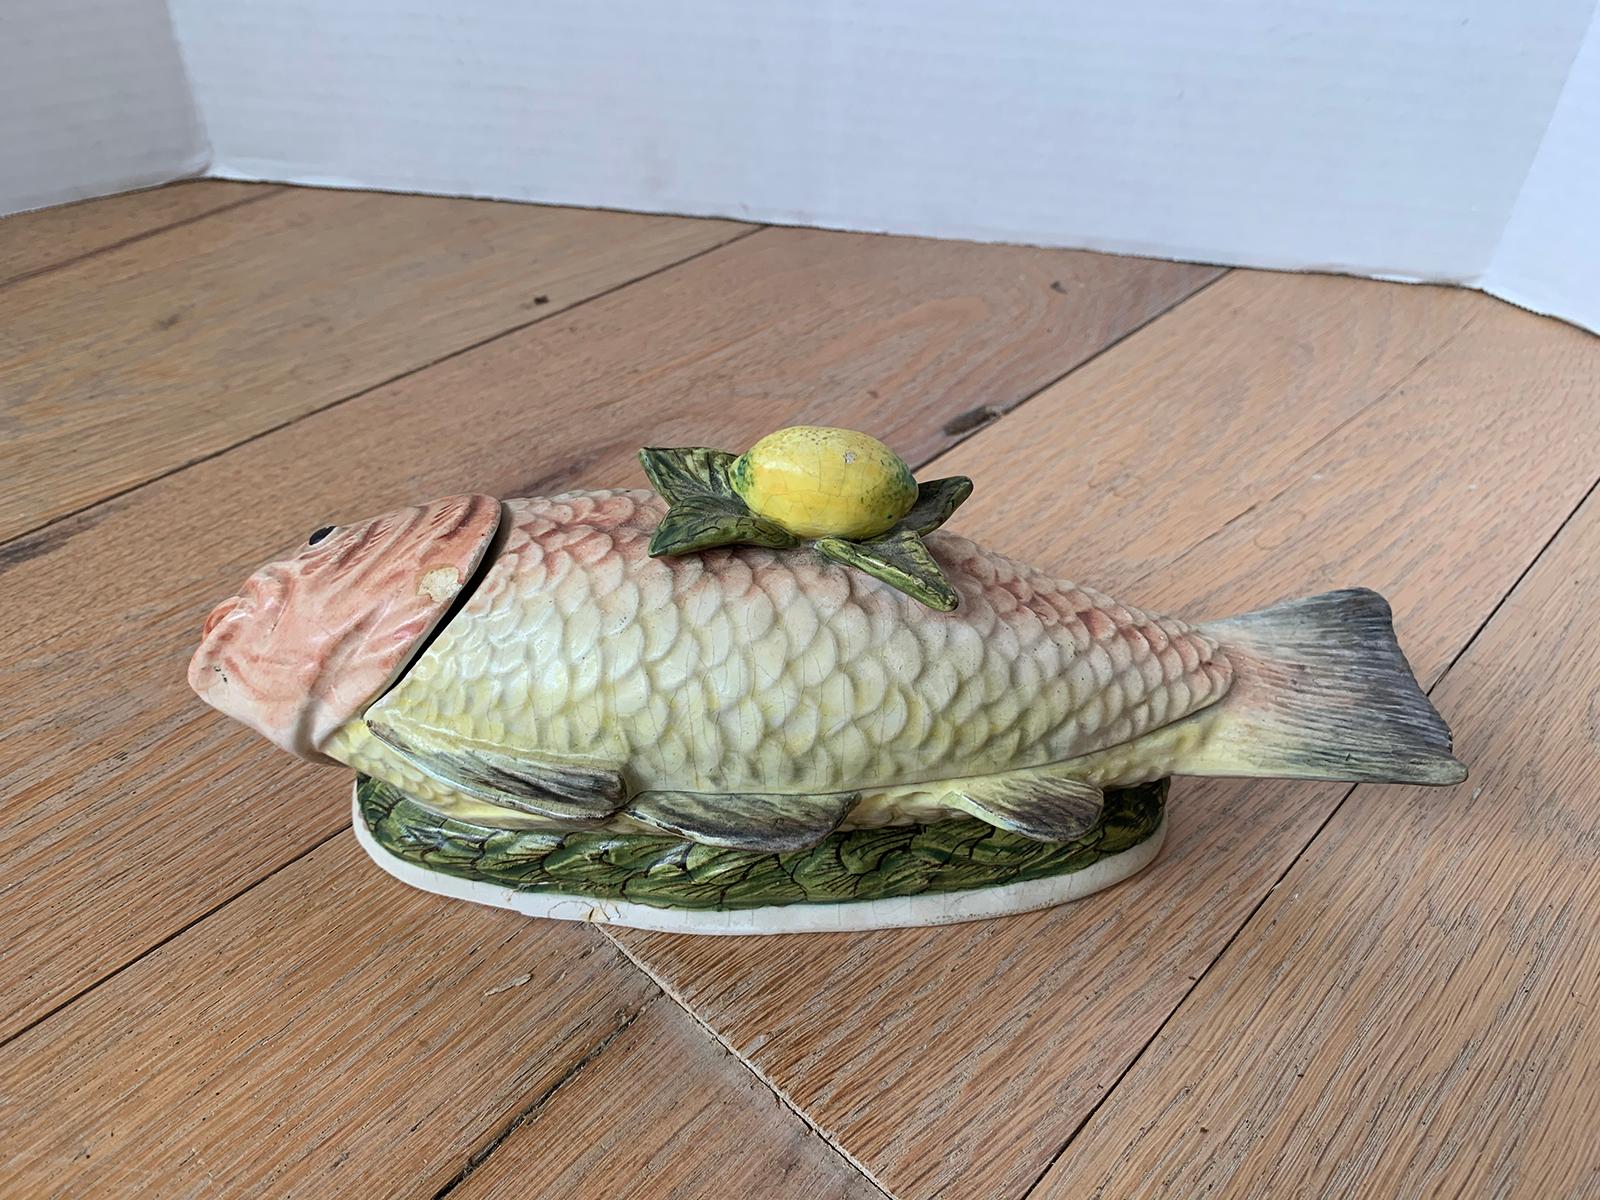 Hand-Painted 18th-19th Century Italian Hand Painted Lidded Porcelain Fish from David Byers